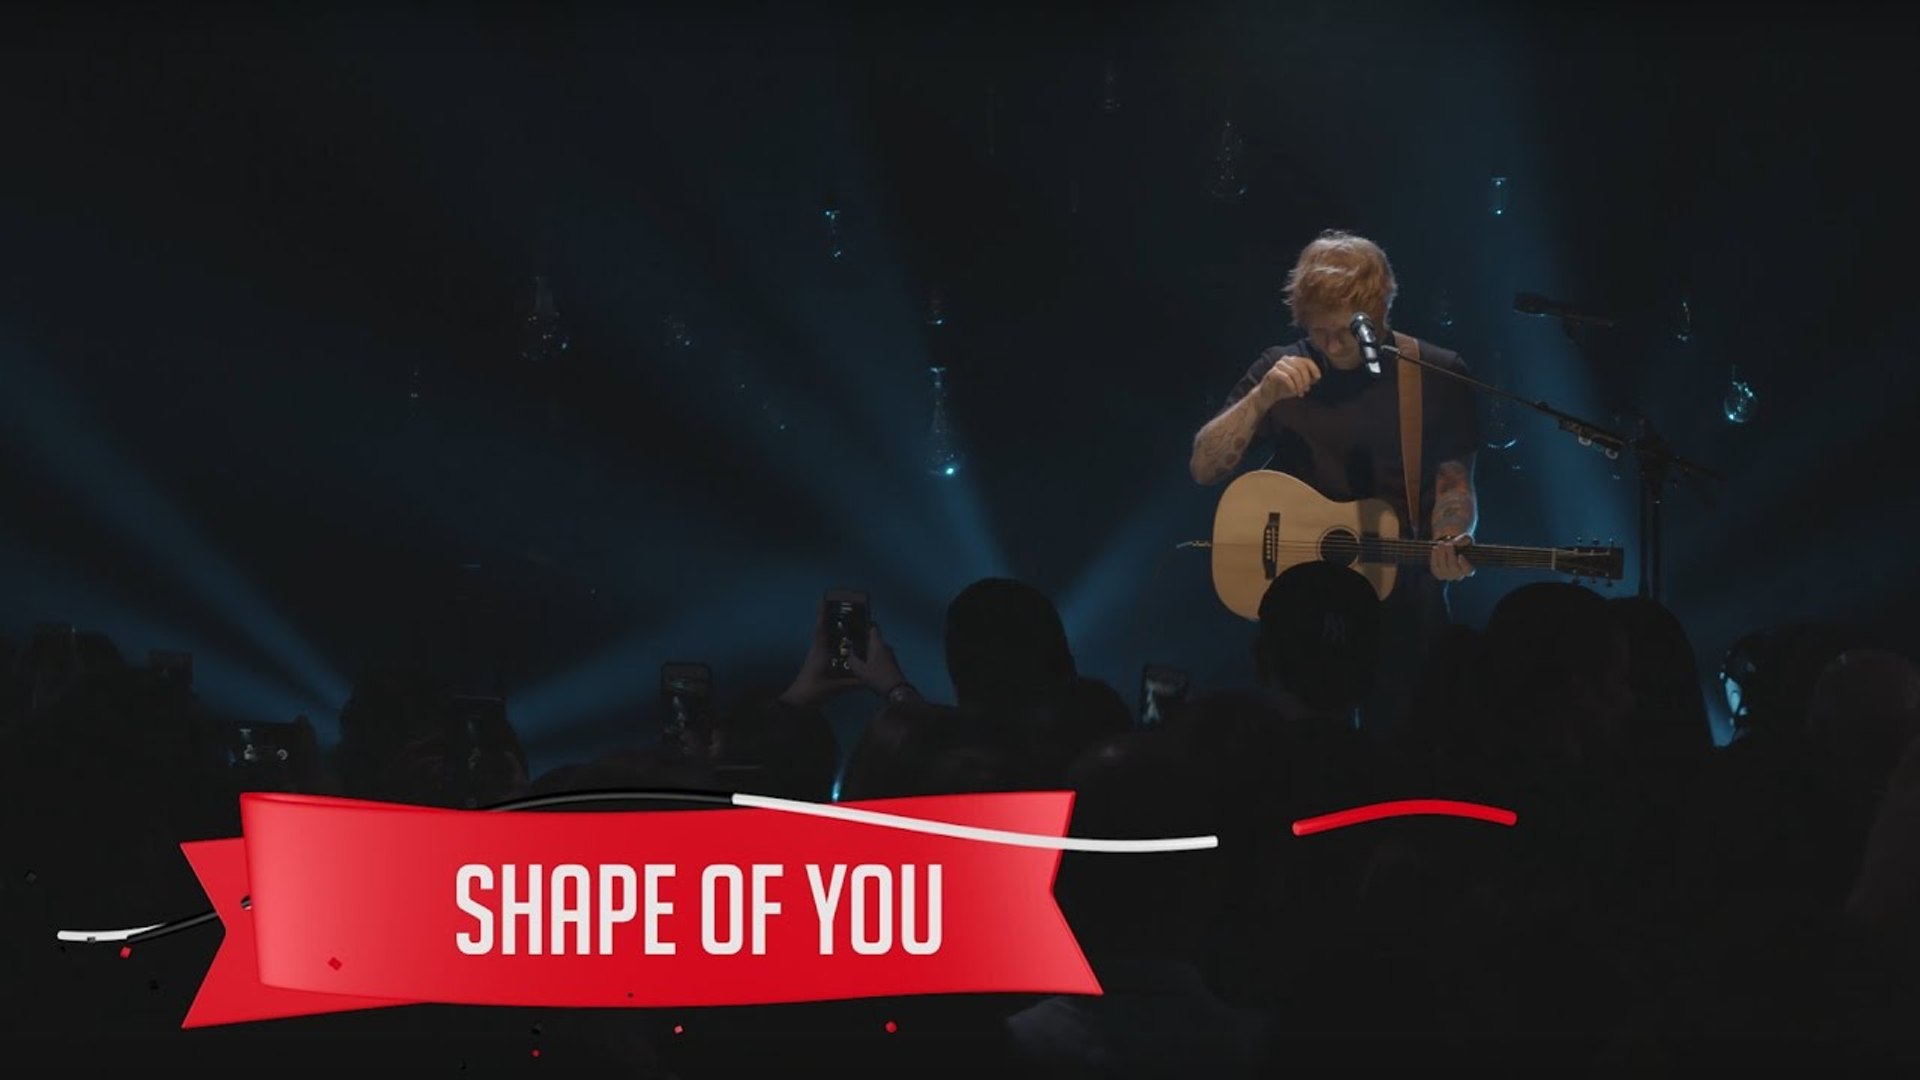 Ed Sheeran - Shape of You (Live on the Honda Stage at the iHeartRadio Theater NY) [Full HD,1920x1080